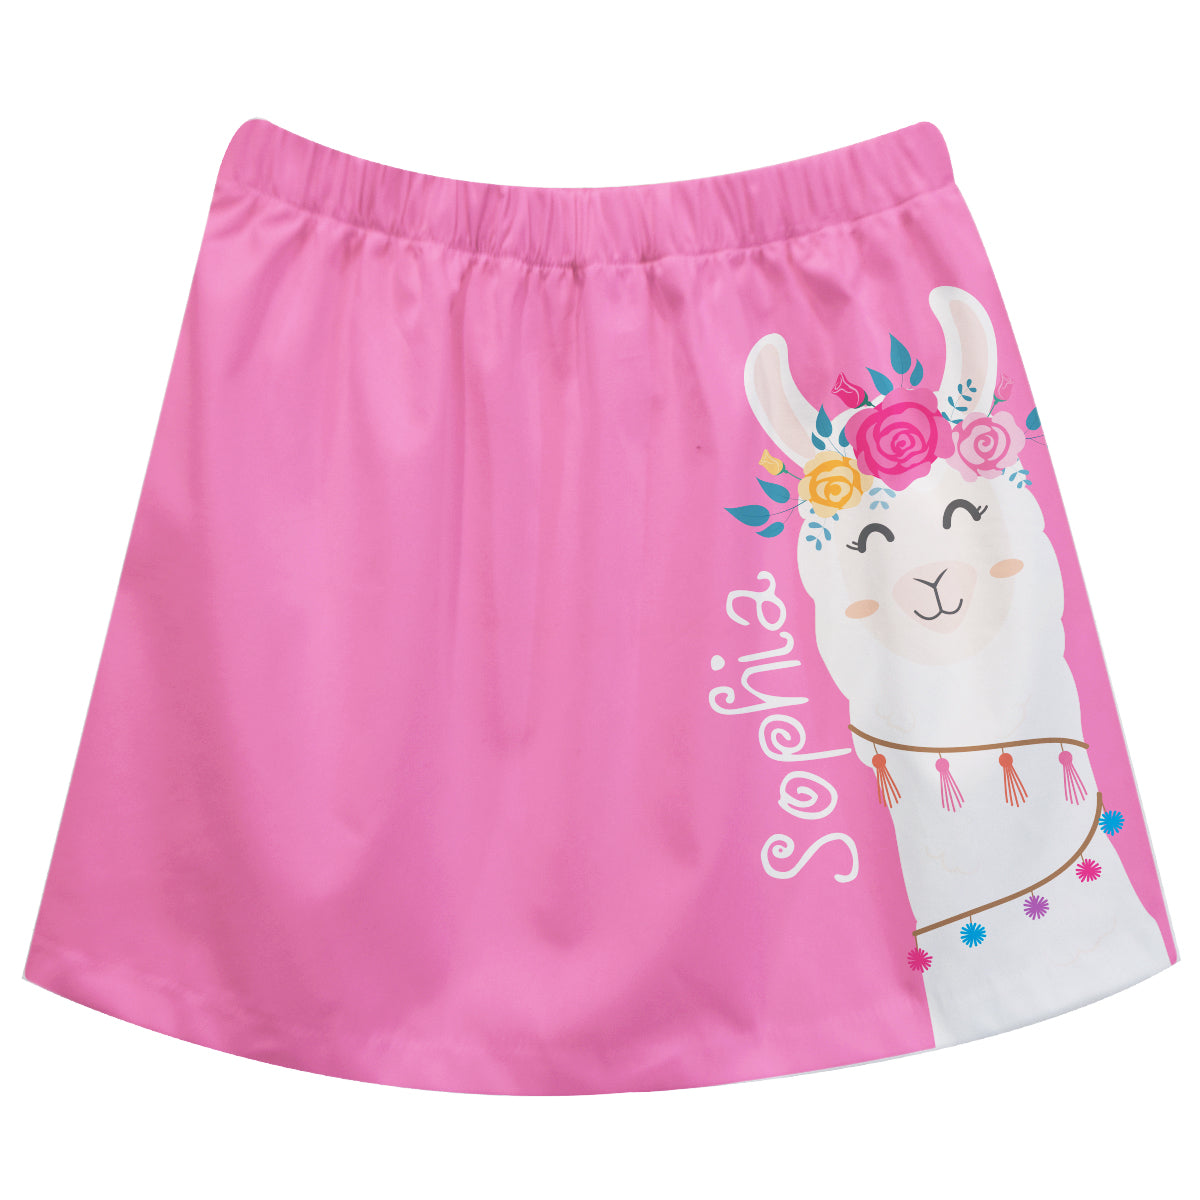 Pink and white llama girls skirt with name - Wimziy&Co.